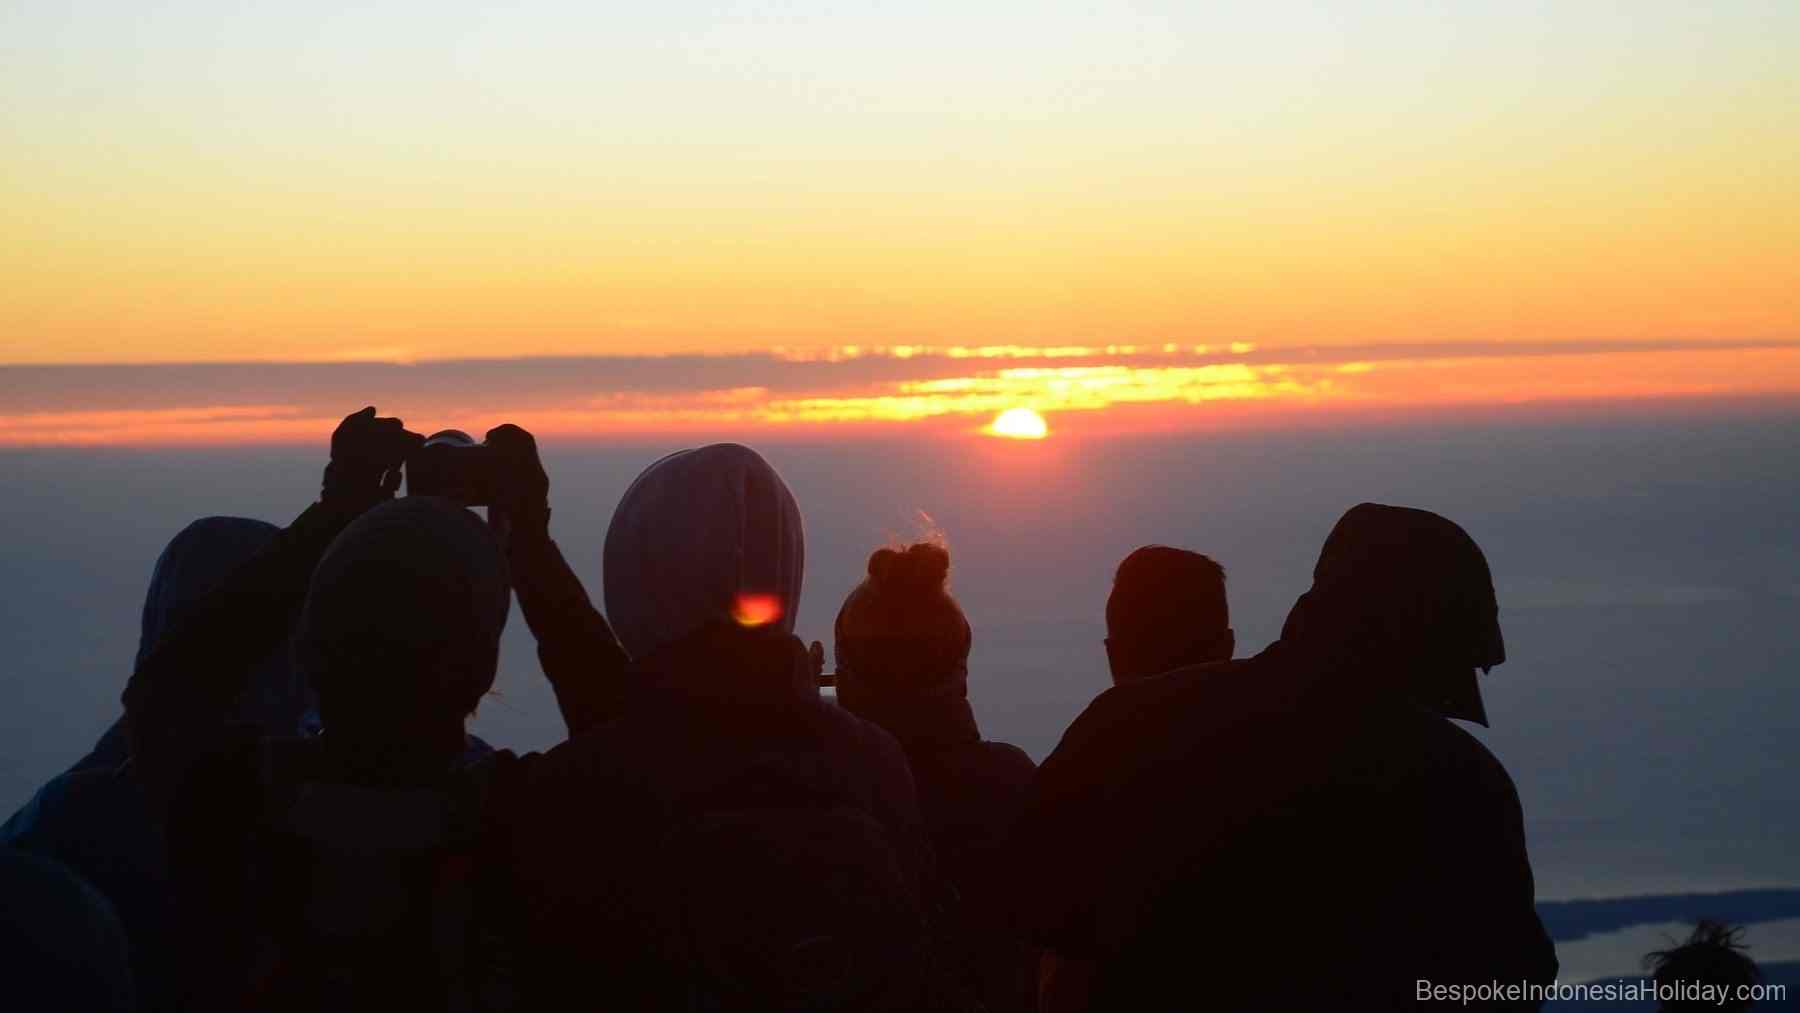 In the foreground 5 dark human figures. The sunrise is orange in front of you. Lombok. Mount Rinjani Trekking Trip | Bespoke Indonesia Holiday.